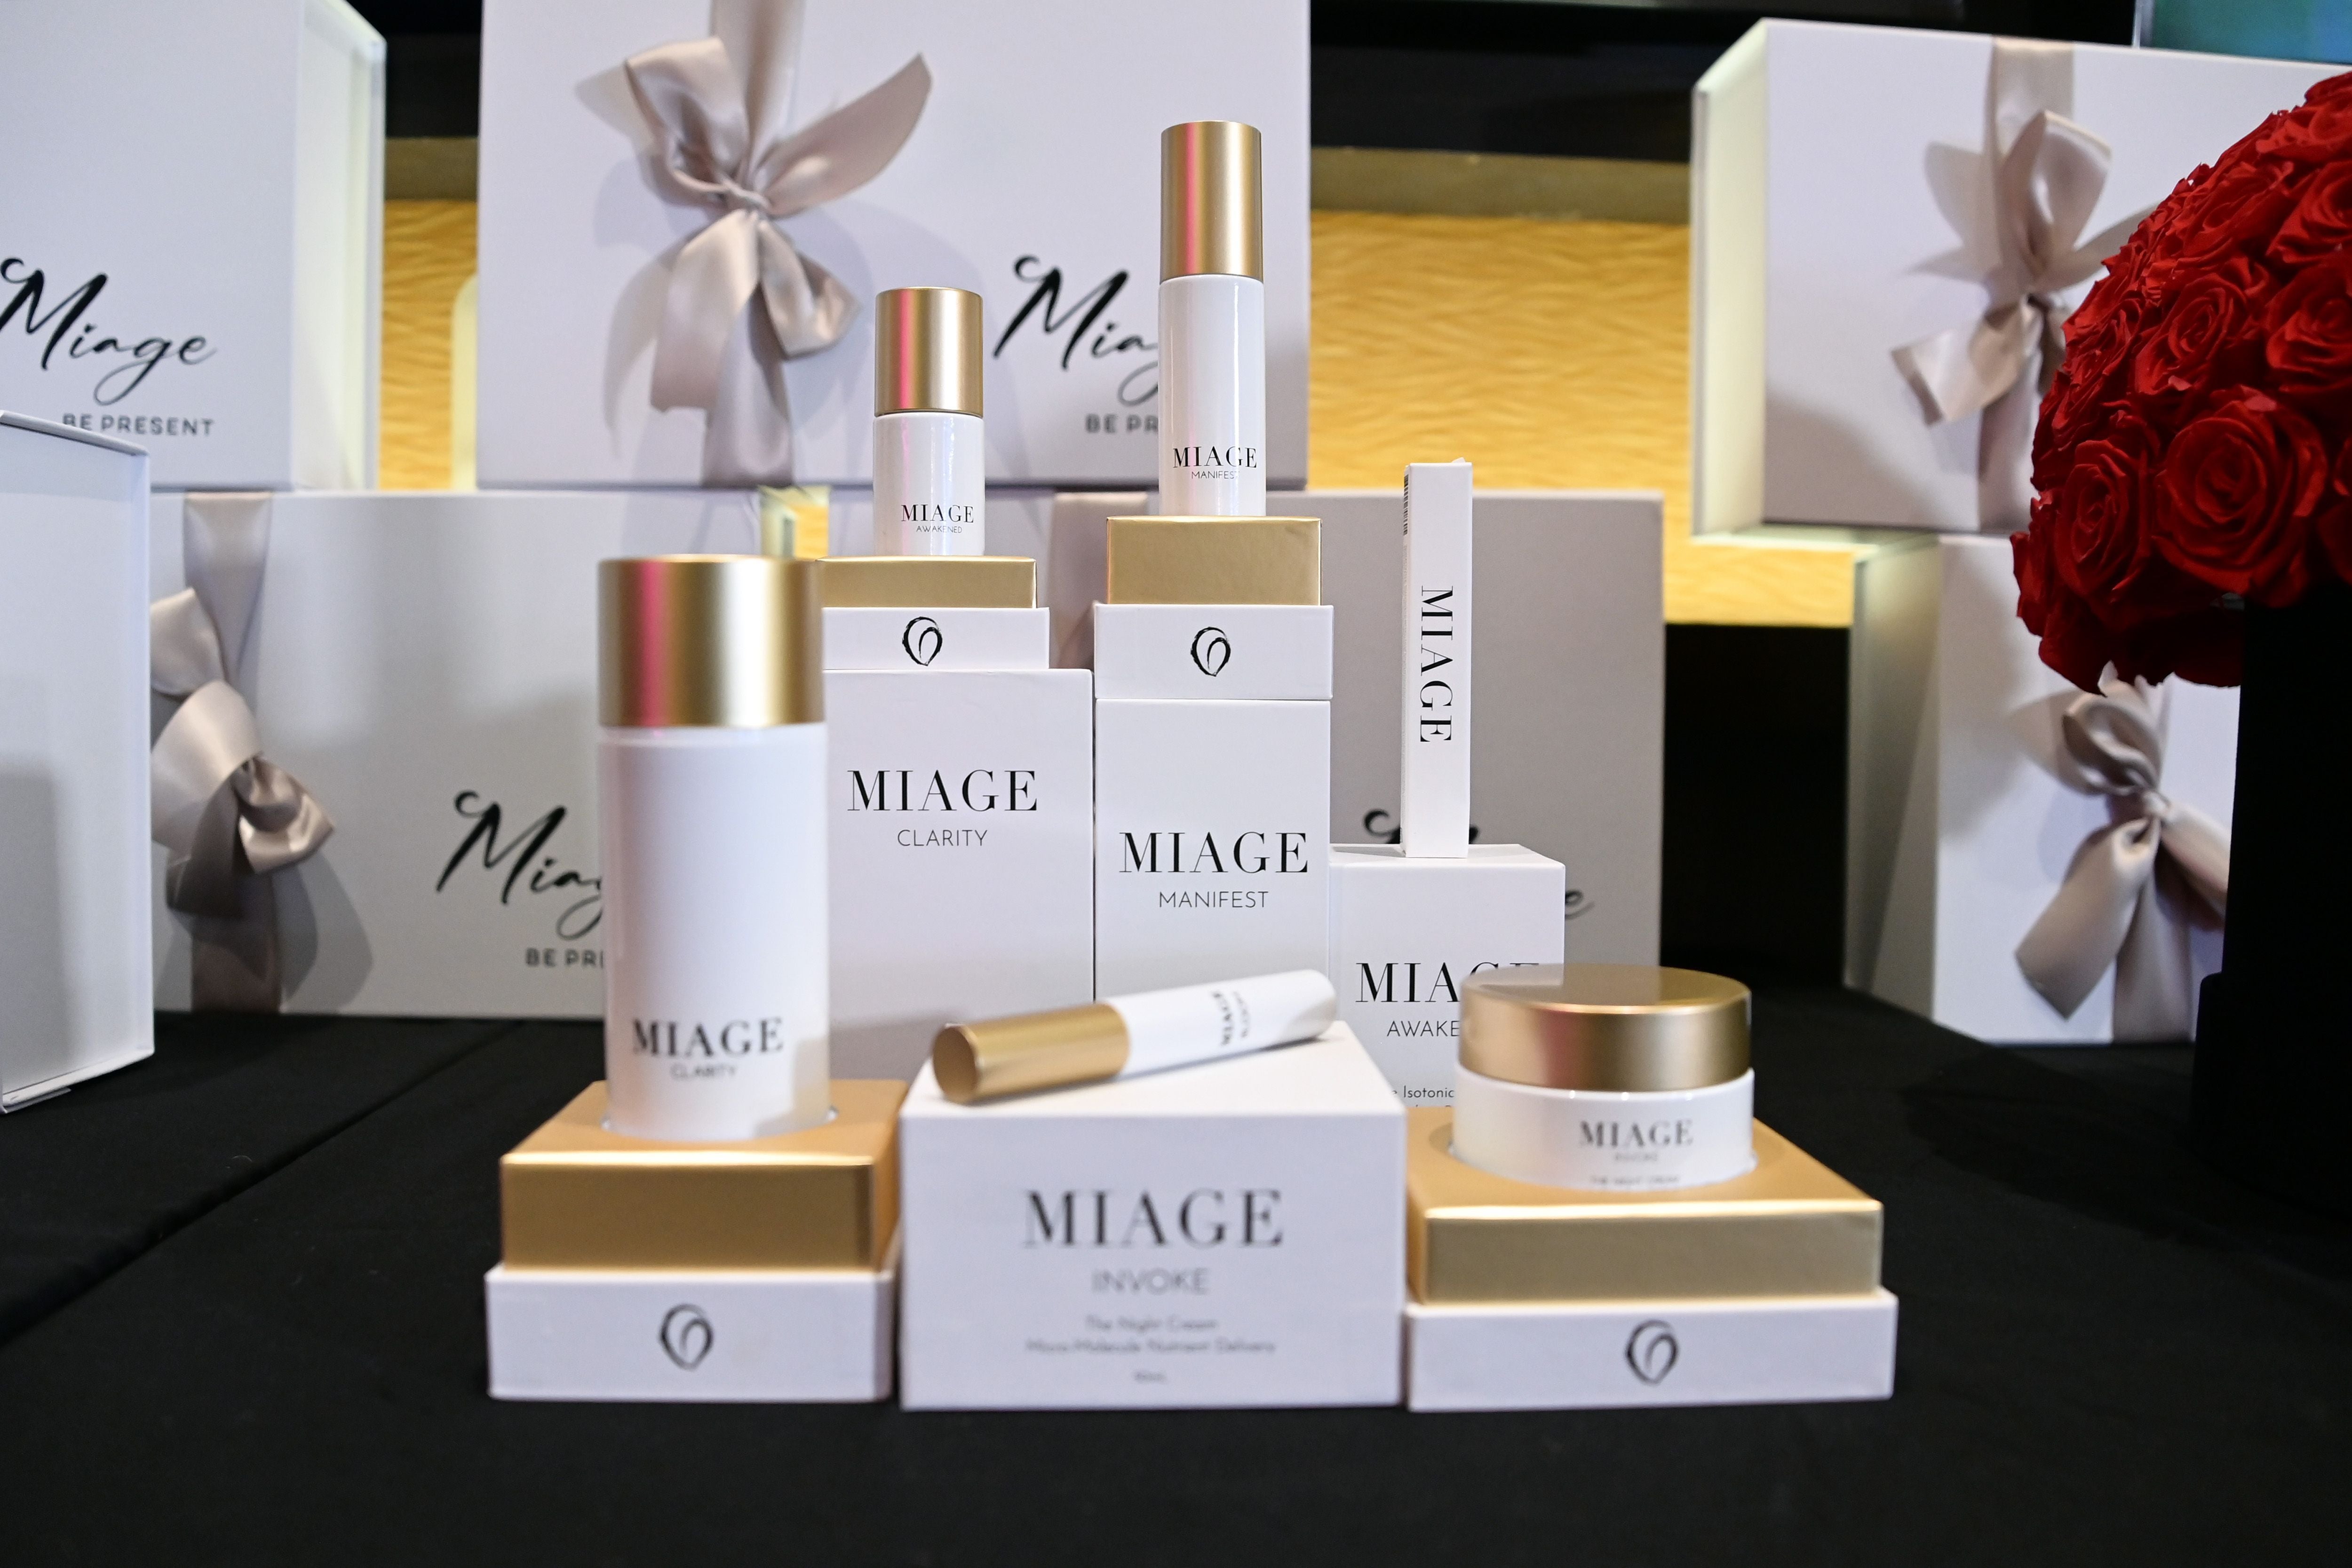 A full set of skincare from luxury brand Miage